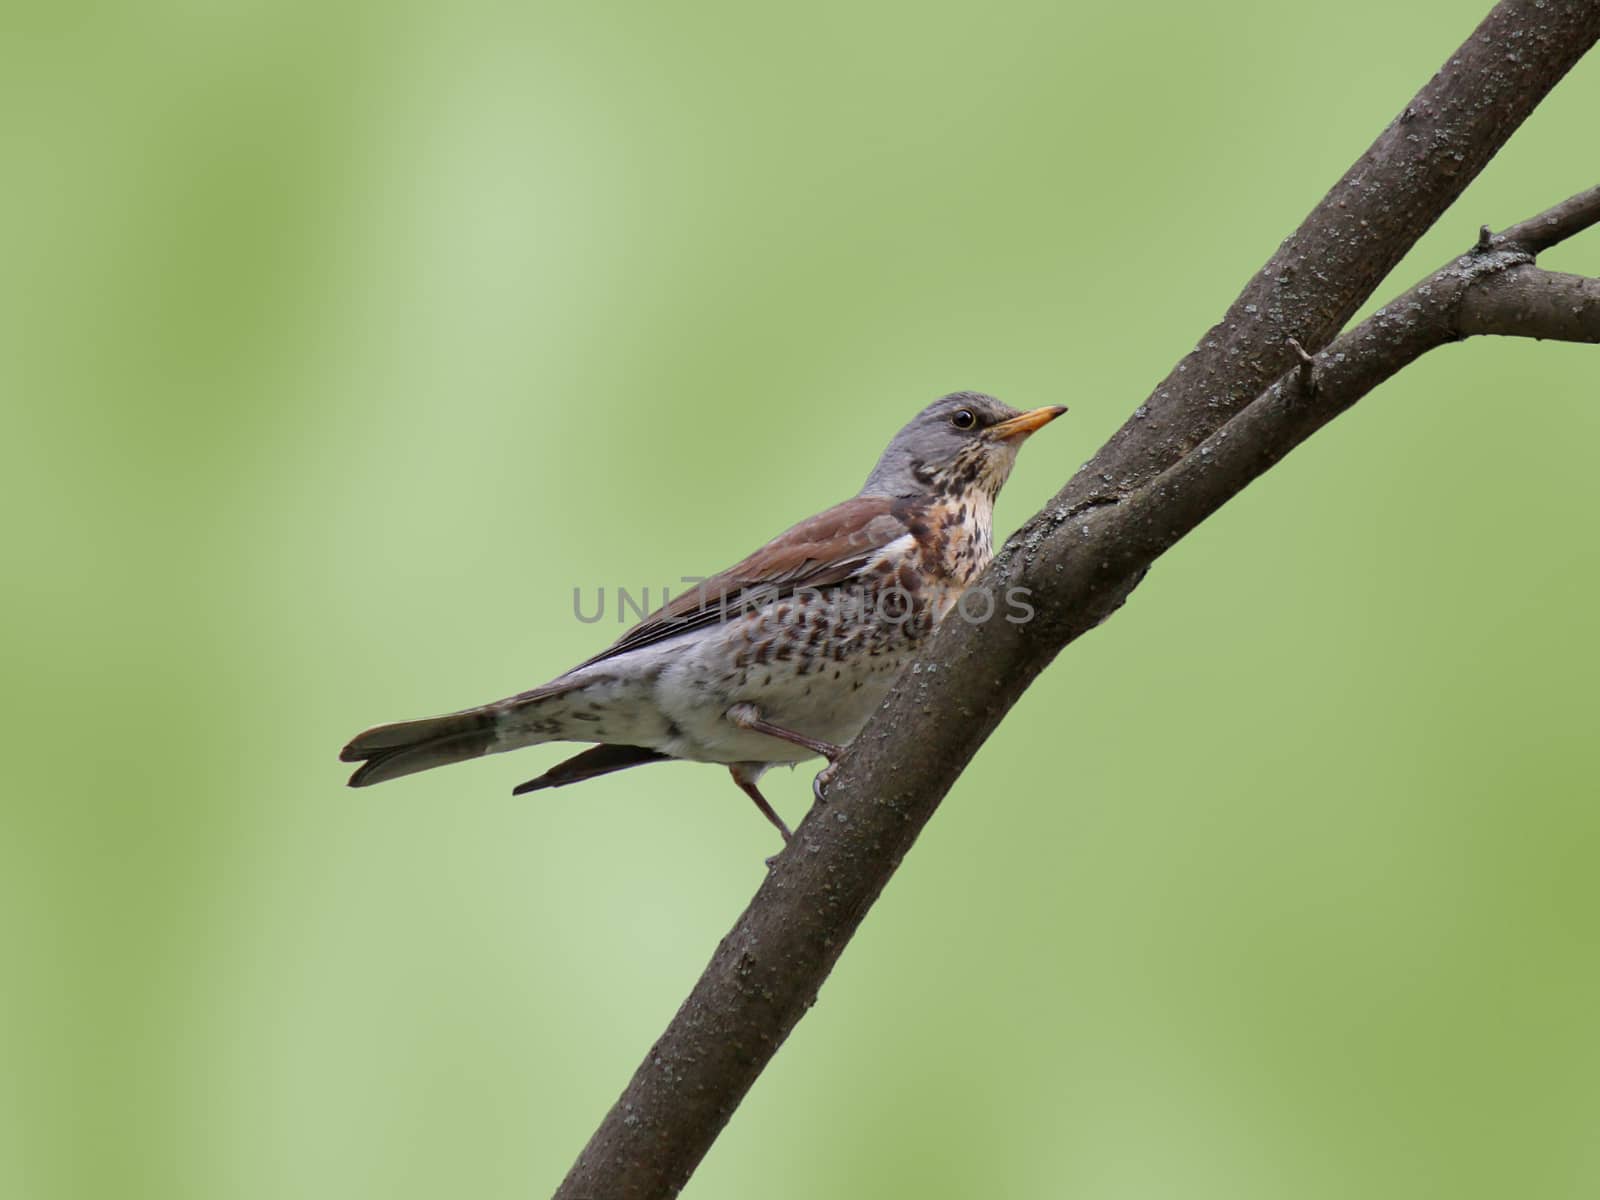 thrush on branch of tree by romantiche